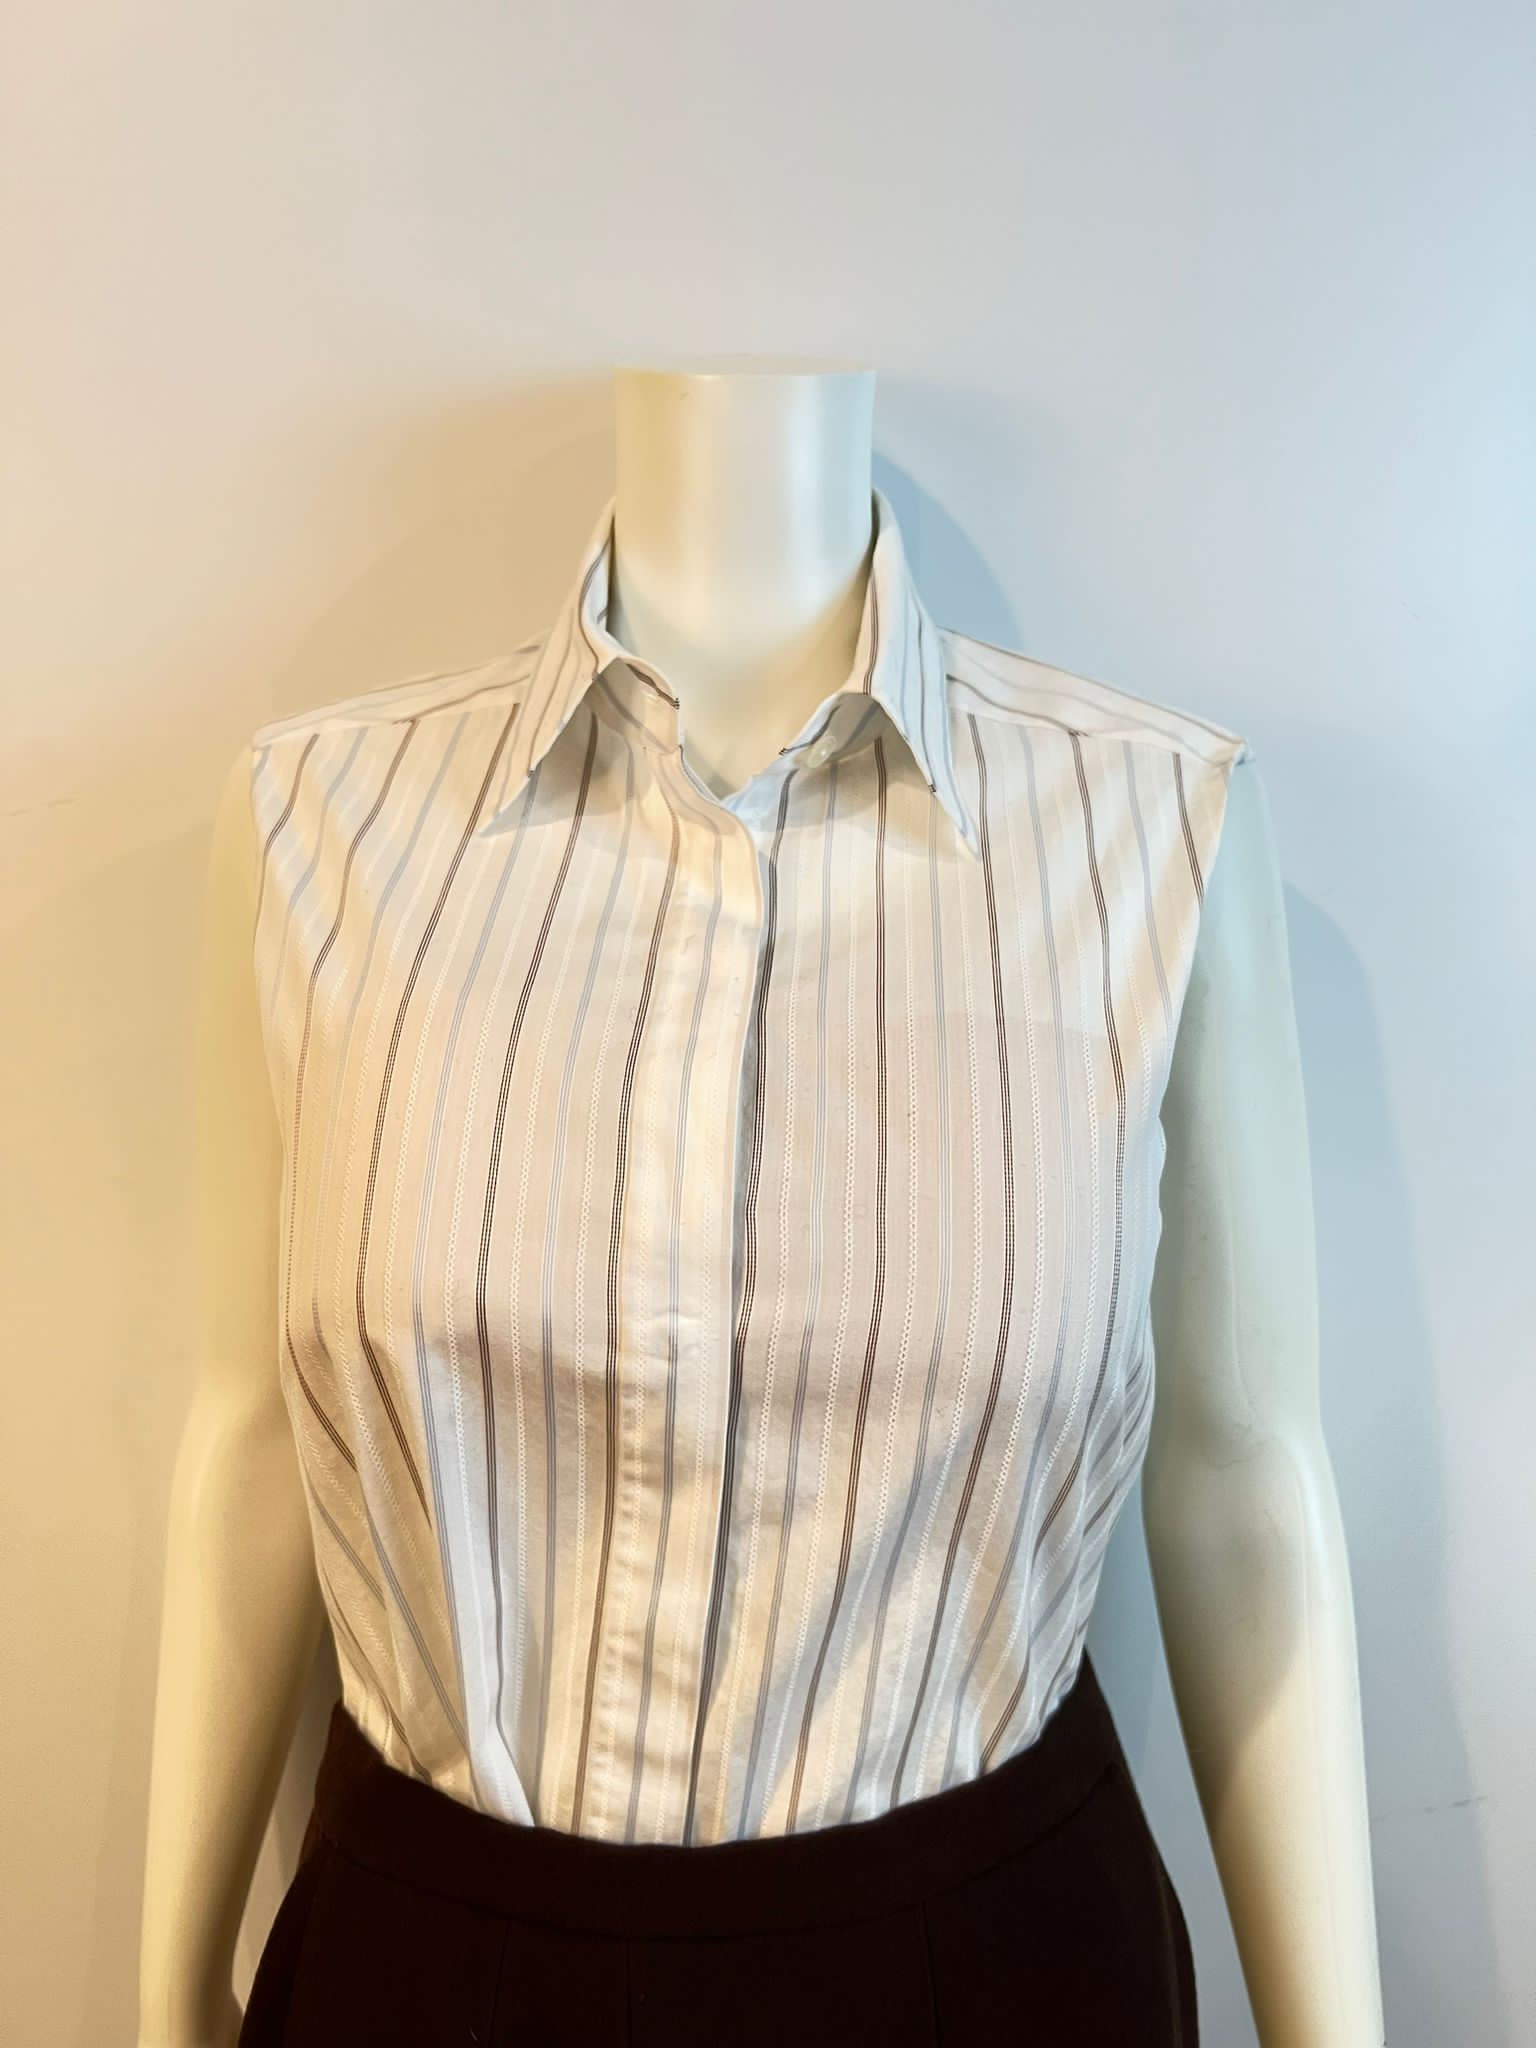 HelensChanel Chanel White Sleeveless Cotton Striped Collar Button Down Top Blouse US 4/6